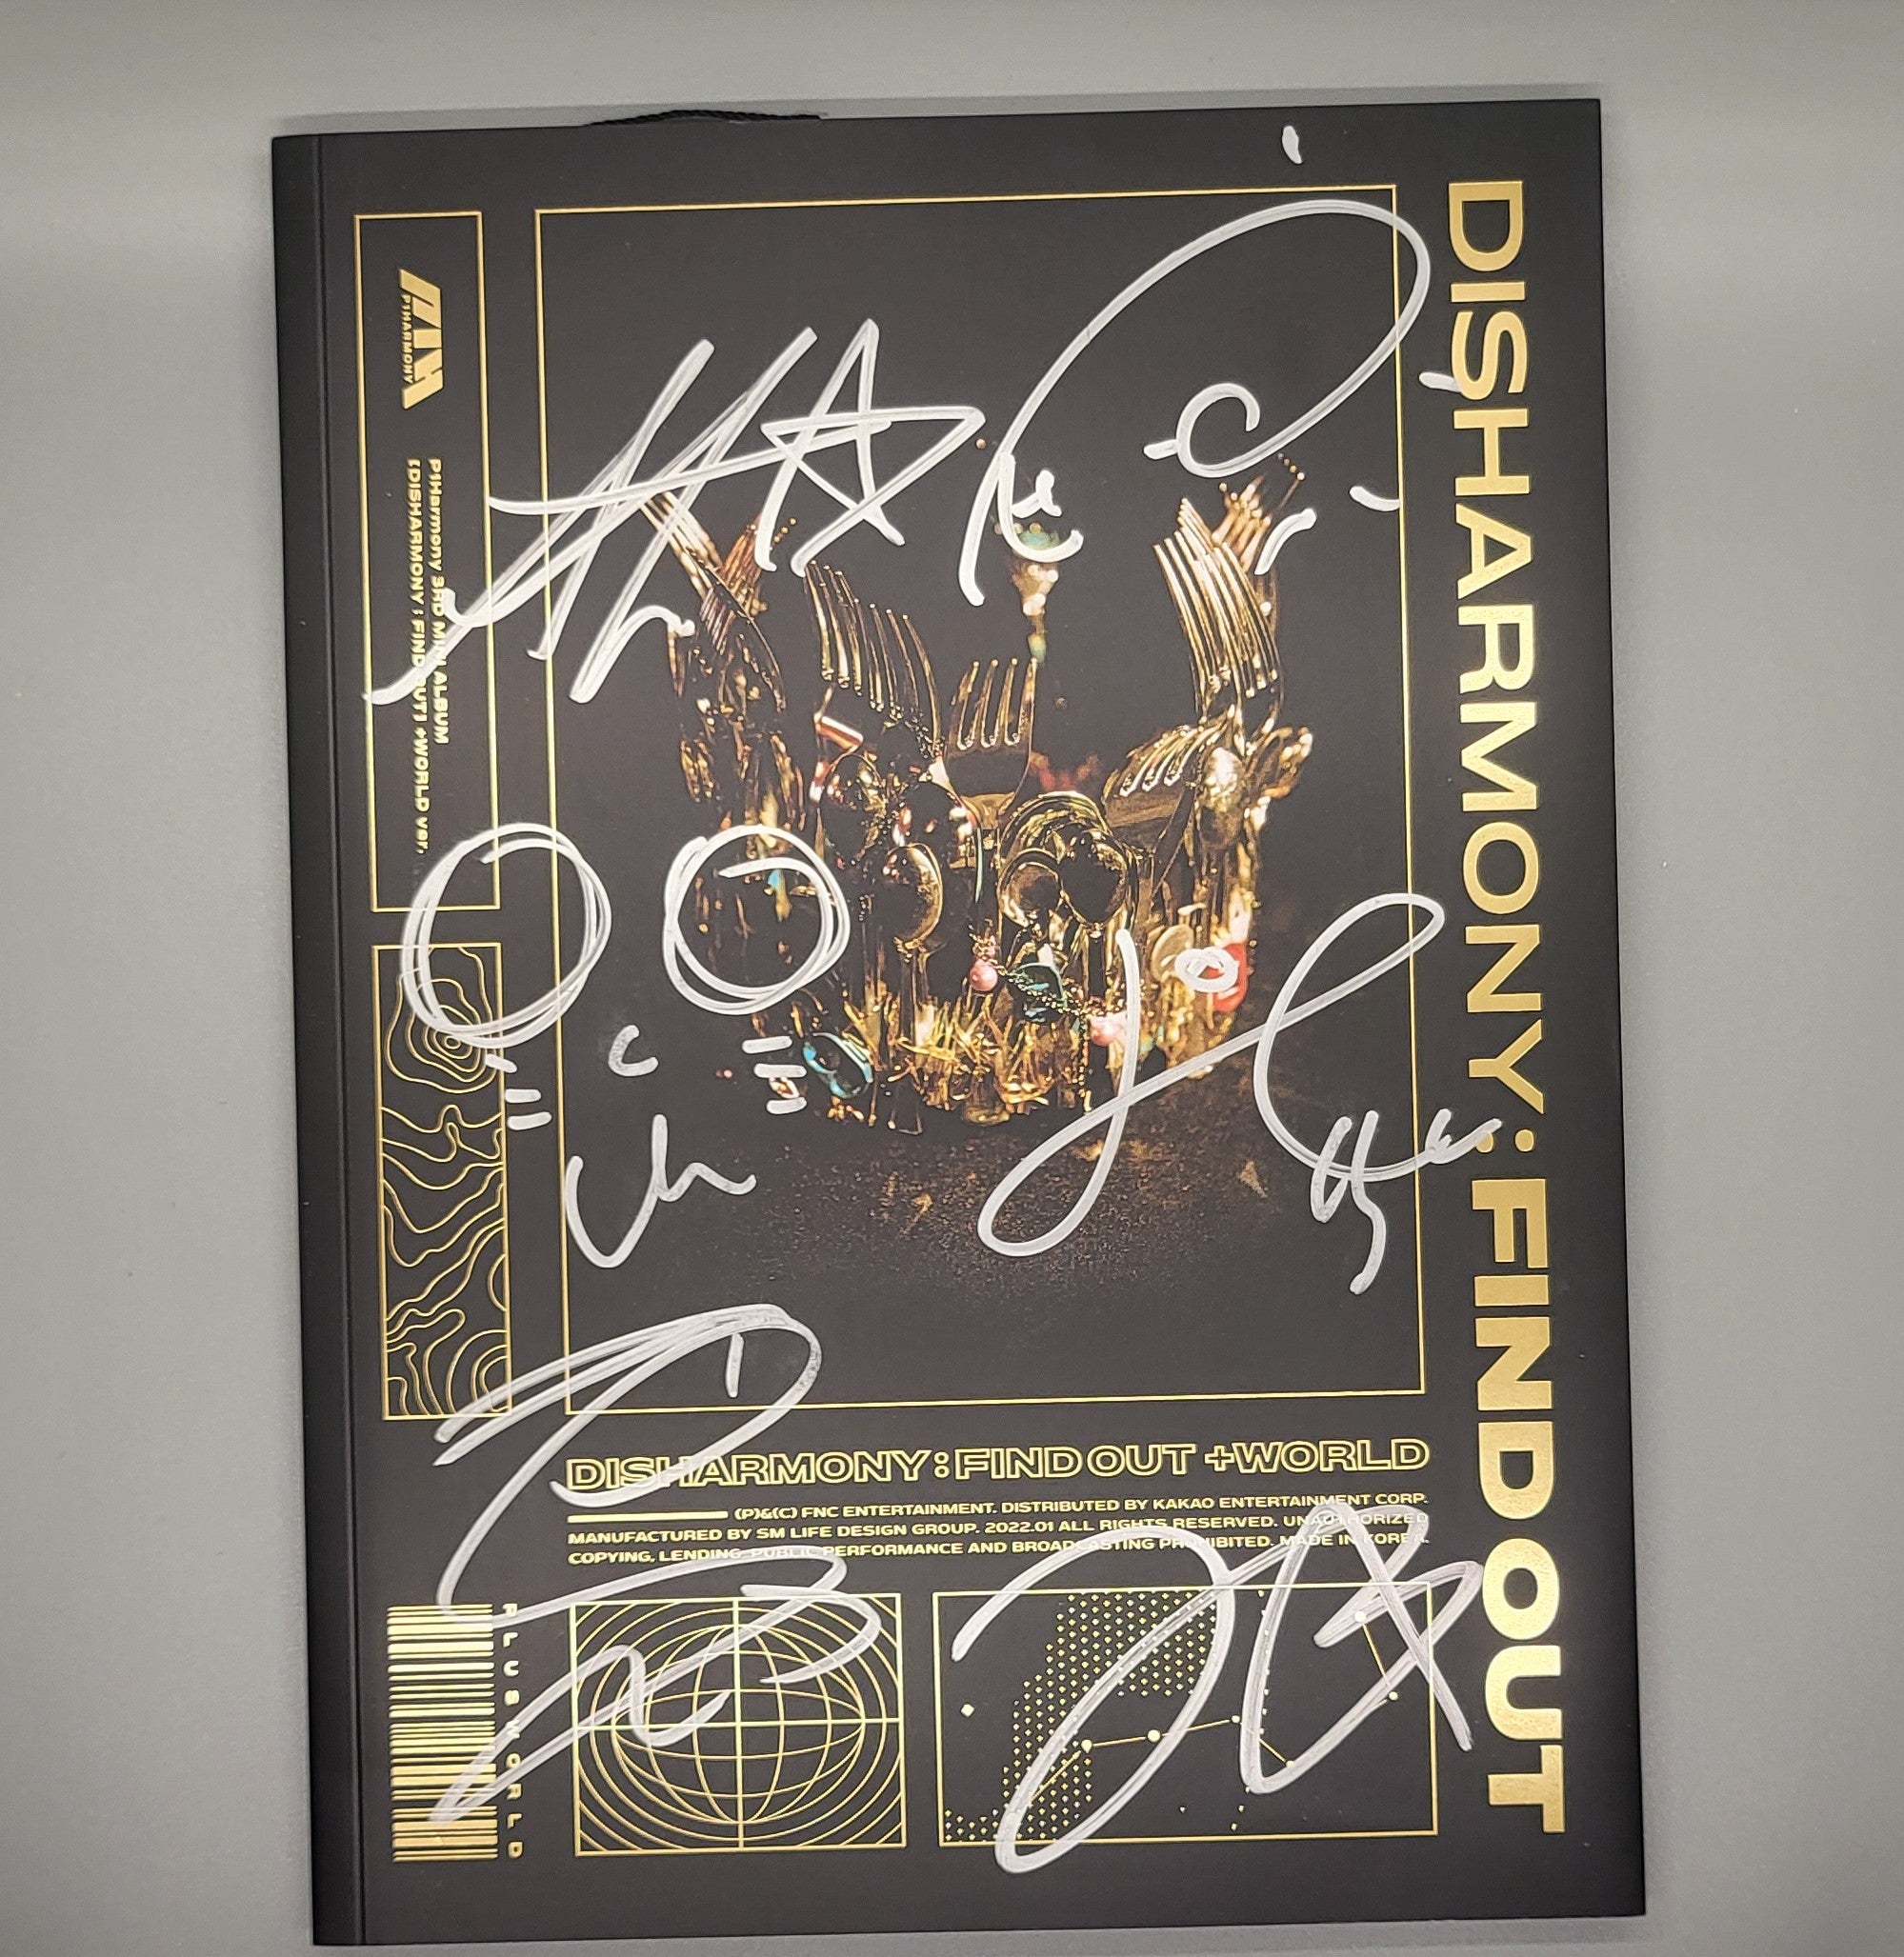 SIGNED CD P1Harmony - 3rd Mini Album [DISHARMONY : FIND OUT]  (Signed by All Members)